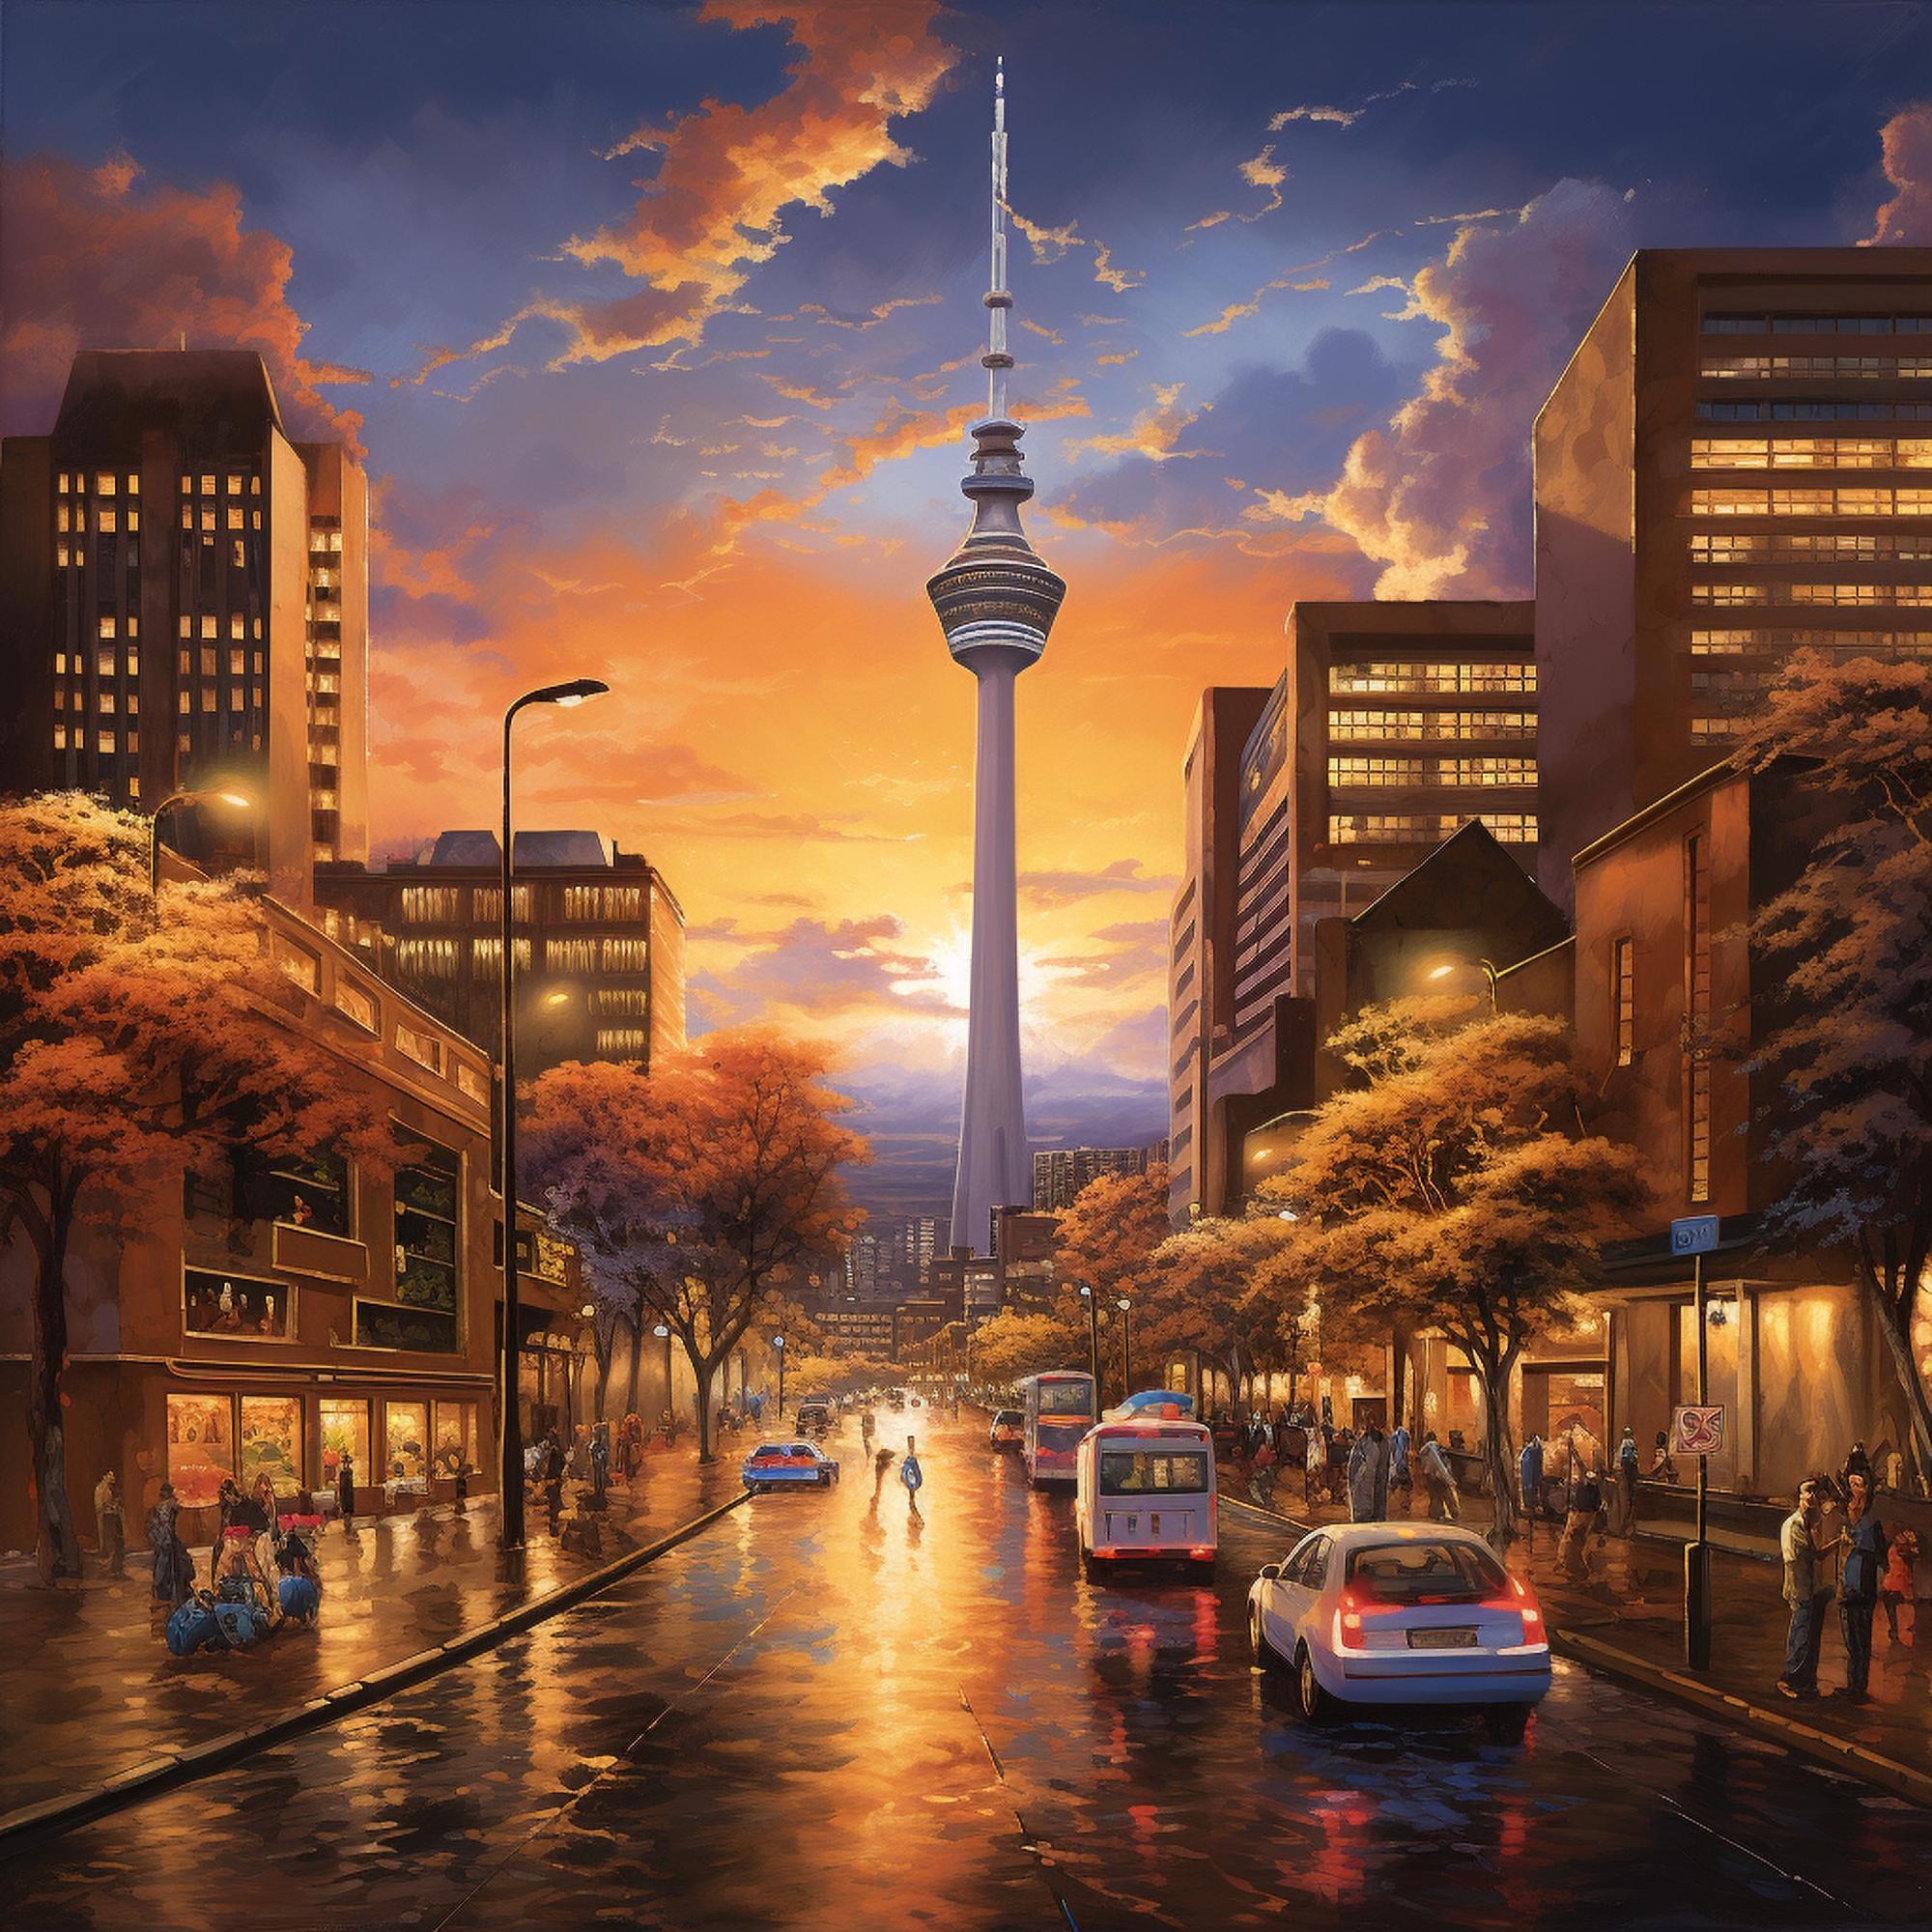 Vivid twilight scene on a lively Johannesburg street with Hillbrow Tower in the background, illustrating the city's vitality and urban charm.